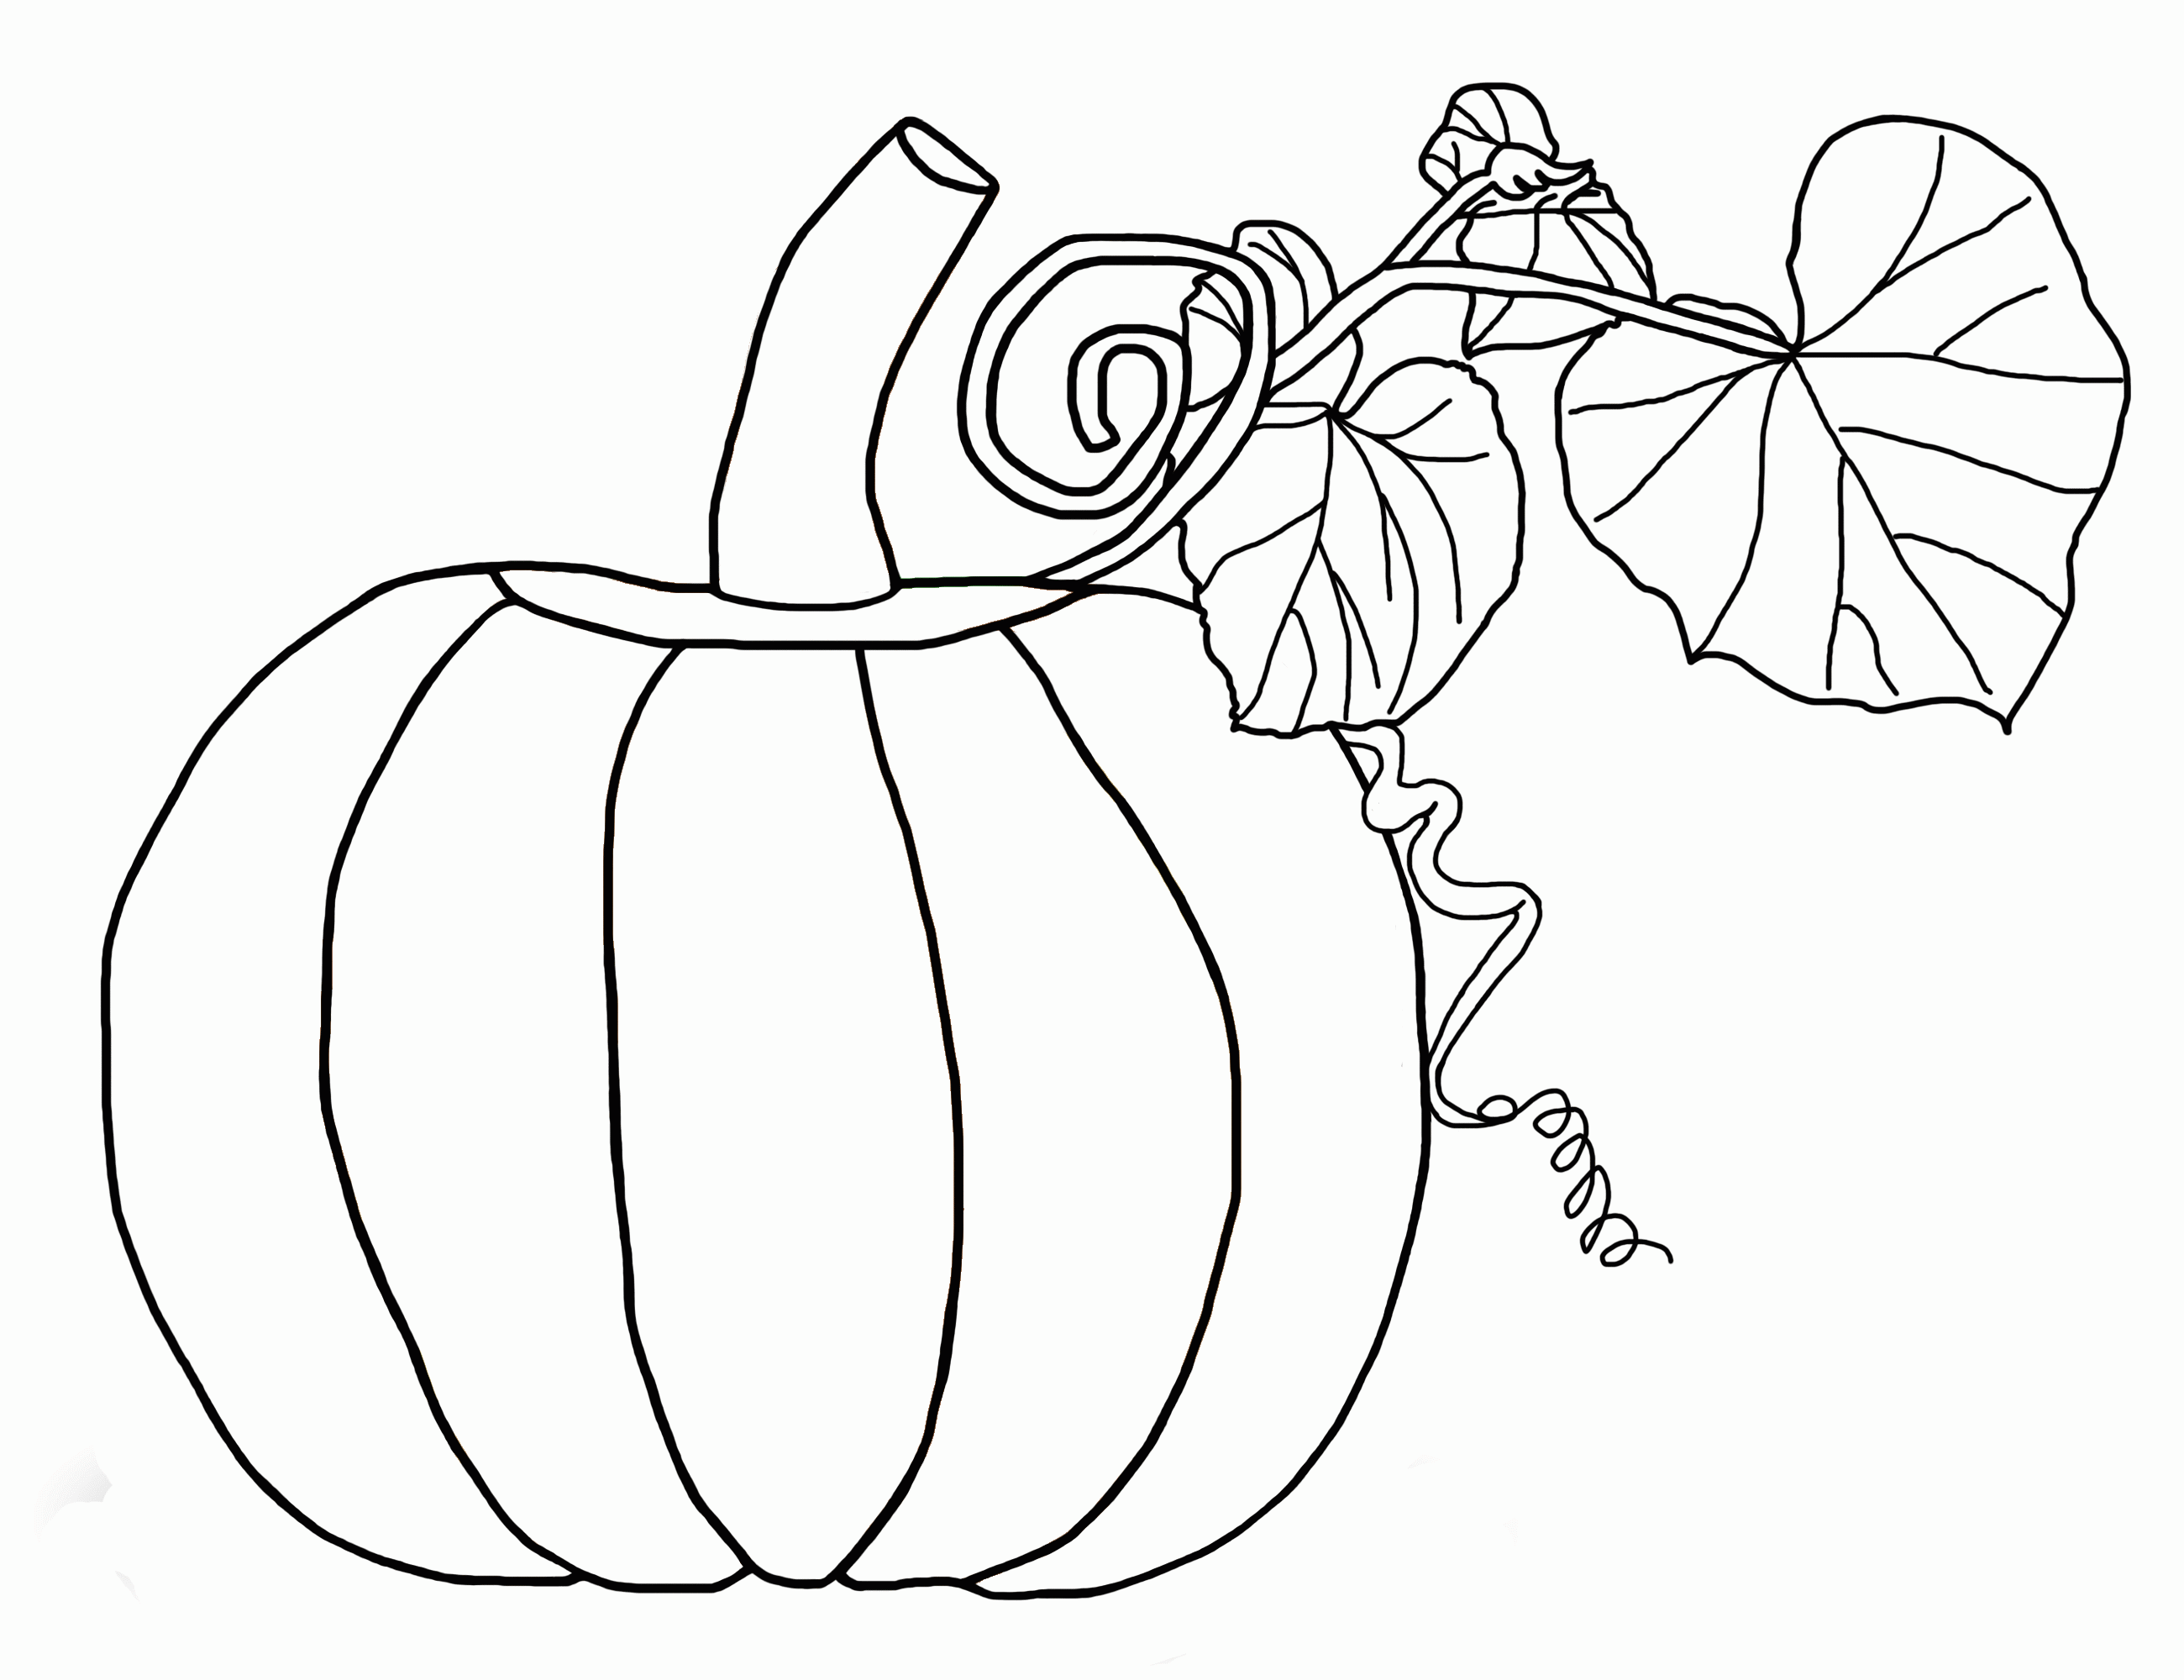 Pumpkin Coloring Pages For Preschool - Coloring Pages